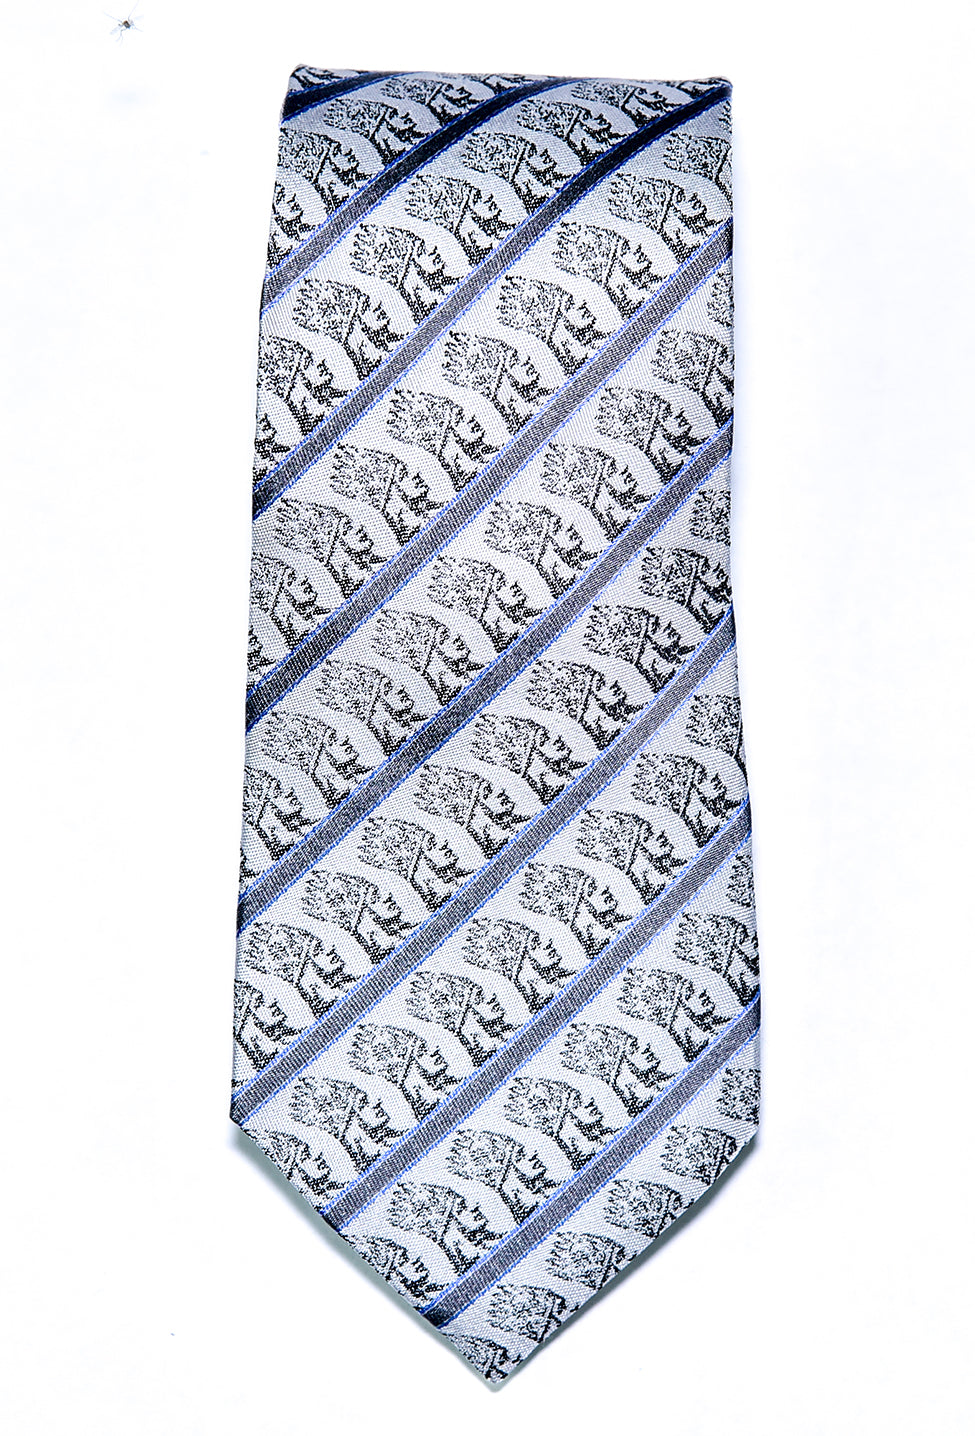 The Kings Silk Neck tie - Lusanet Collective